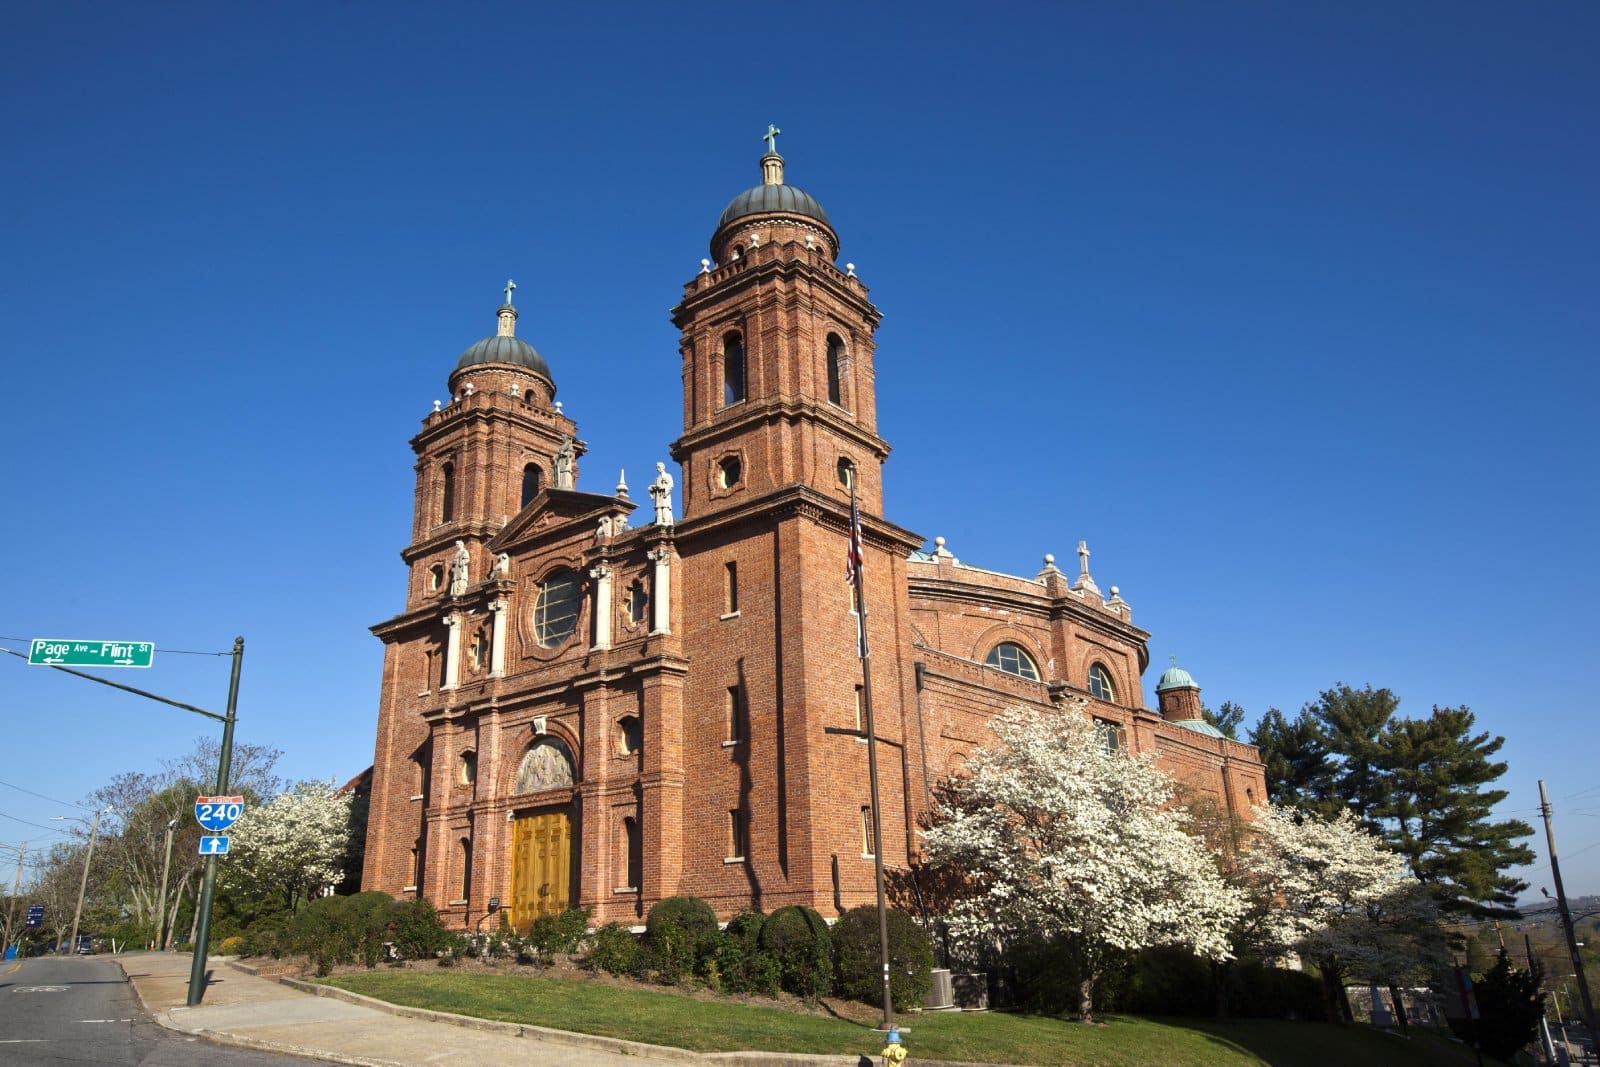 Image Credit: Shutterstock / aceshot1 <p><span>This Asheville basilica boasts one of the largest freestanding elliptical domes in the country, with stunning interior designs that inspire awe and reverence.</span></p>